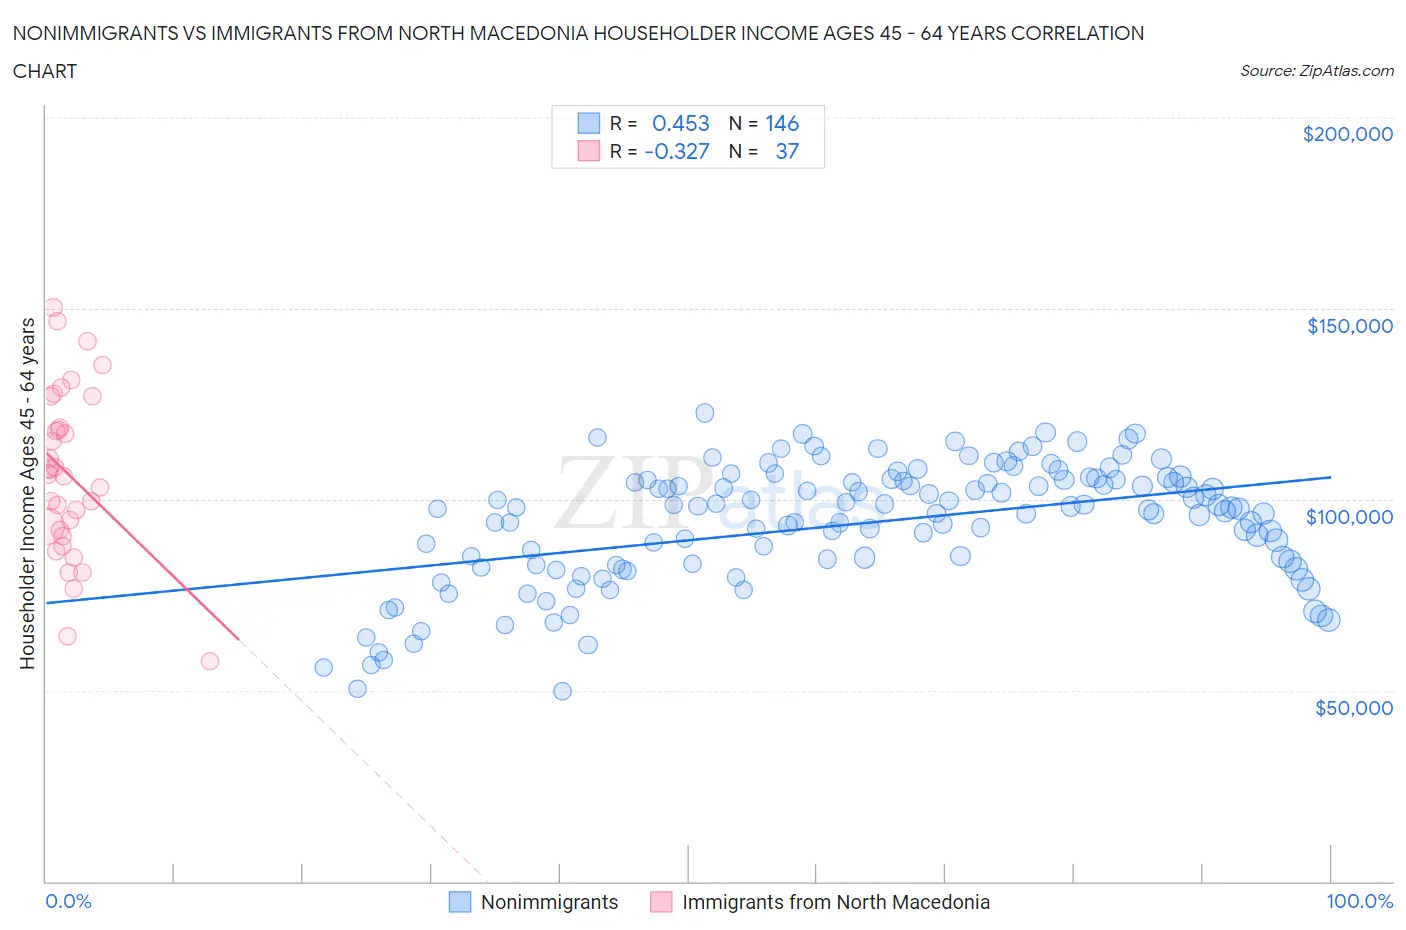 Nonimmigrants vs Immigrants from North Macedonia Householder Income Ages 45 - 64 years